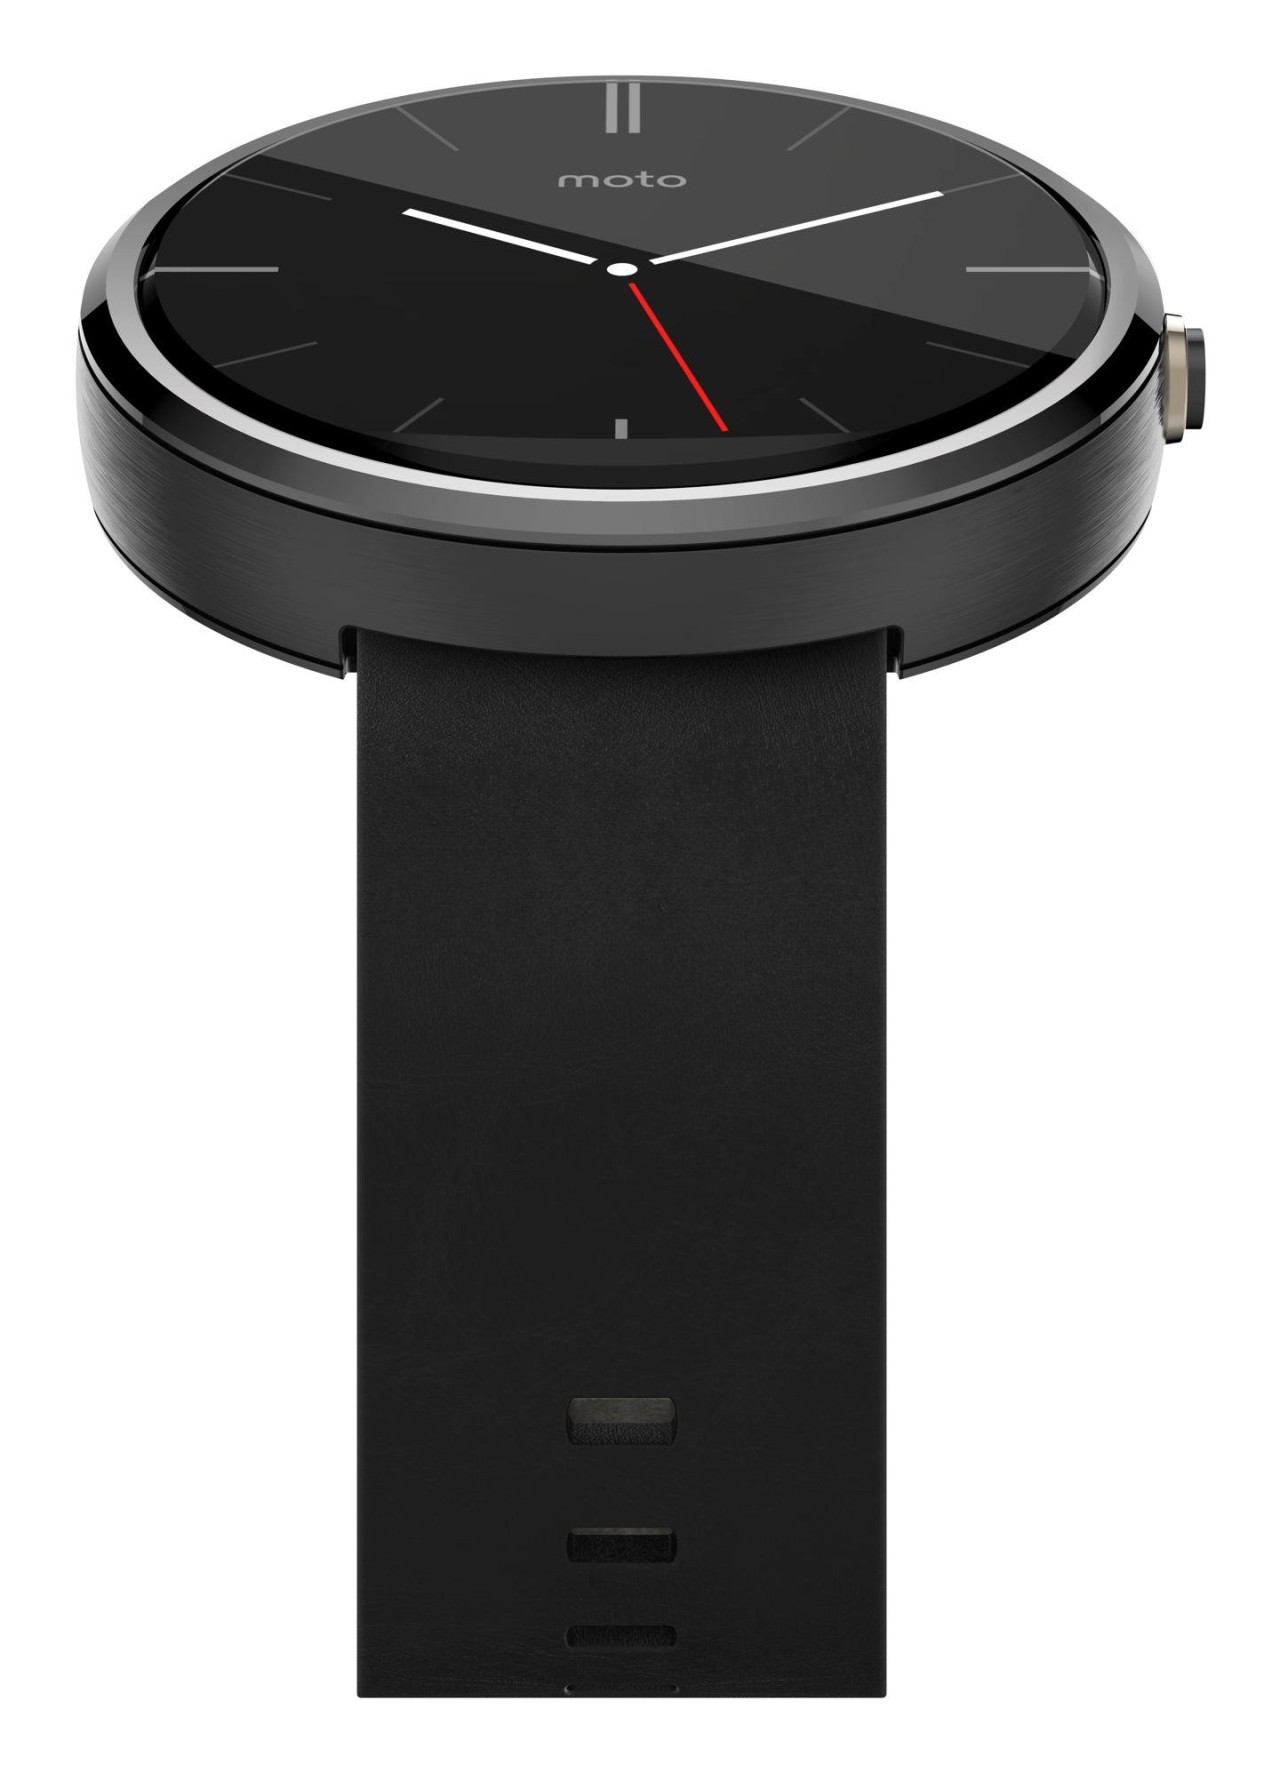 Moto 360 Press Images 7 1280x1773 - The Moto 360 is now available for $250